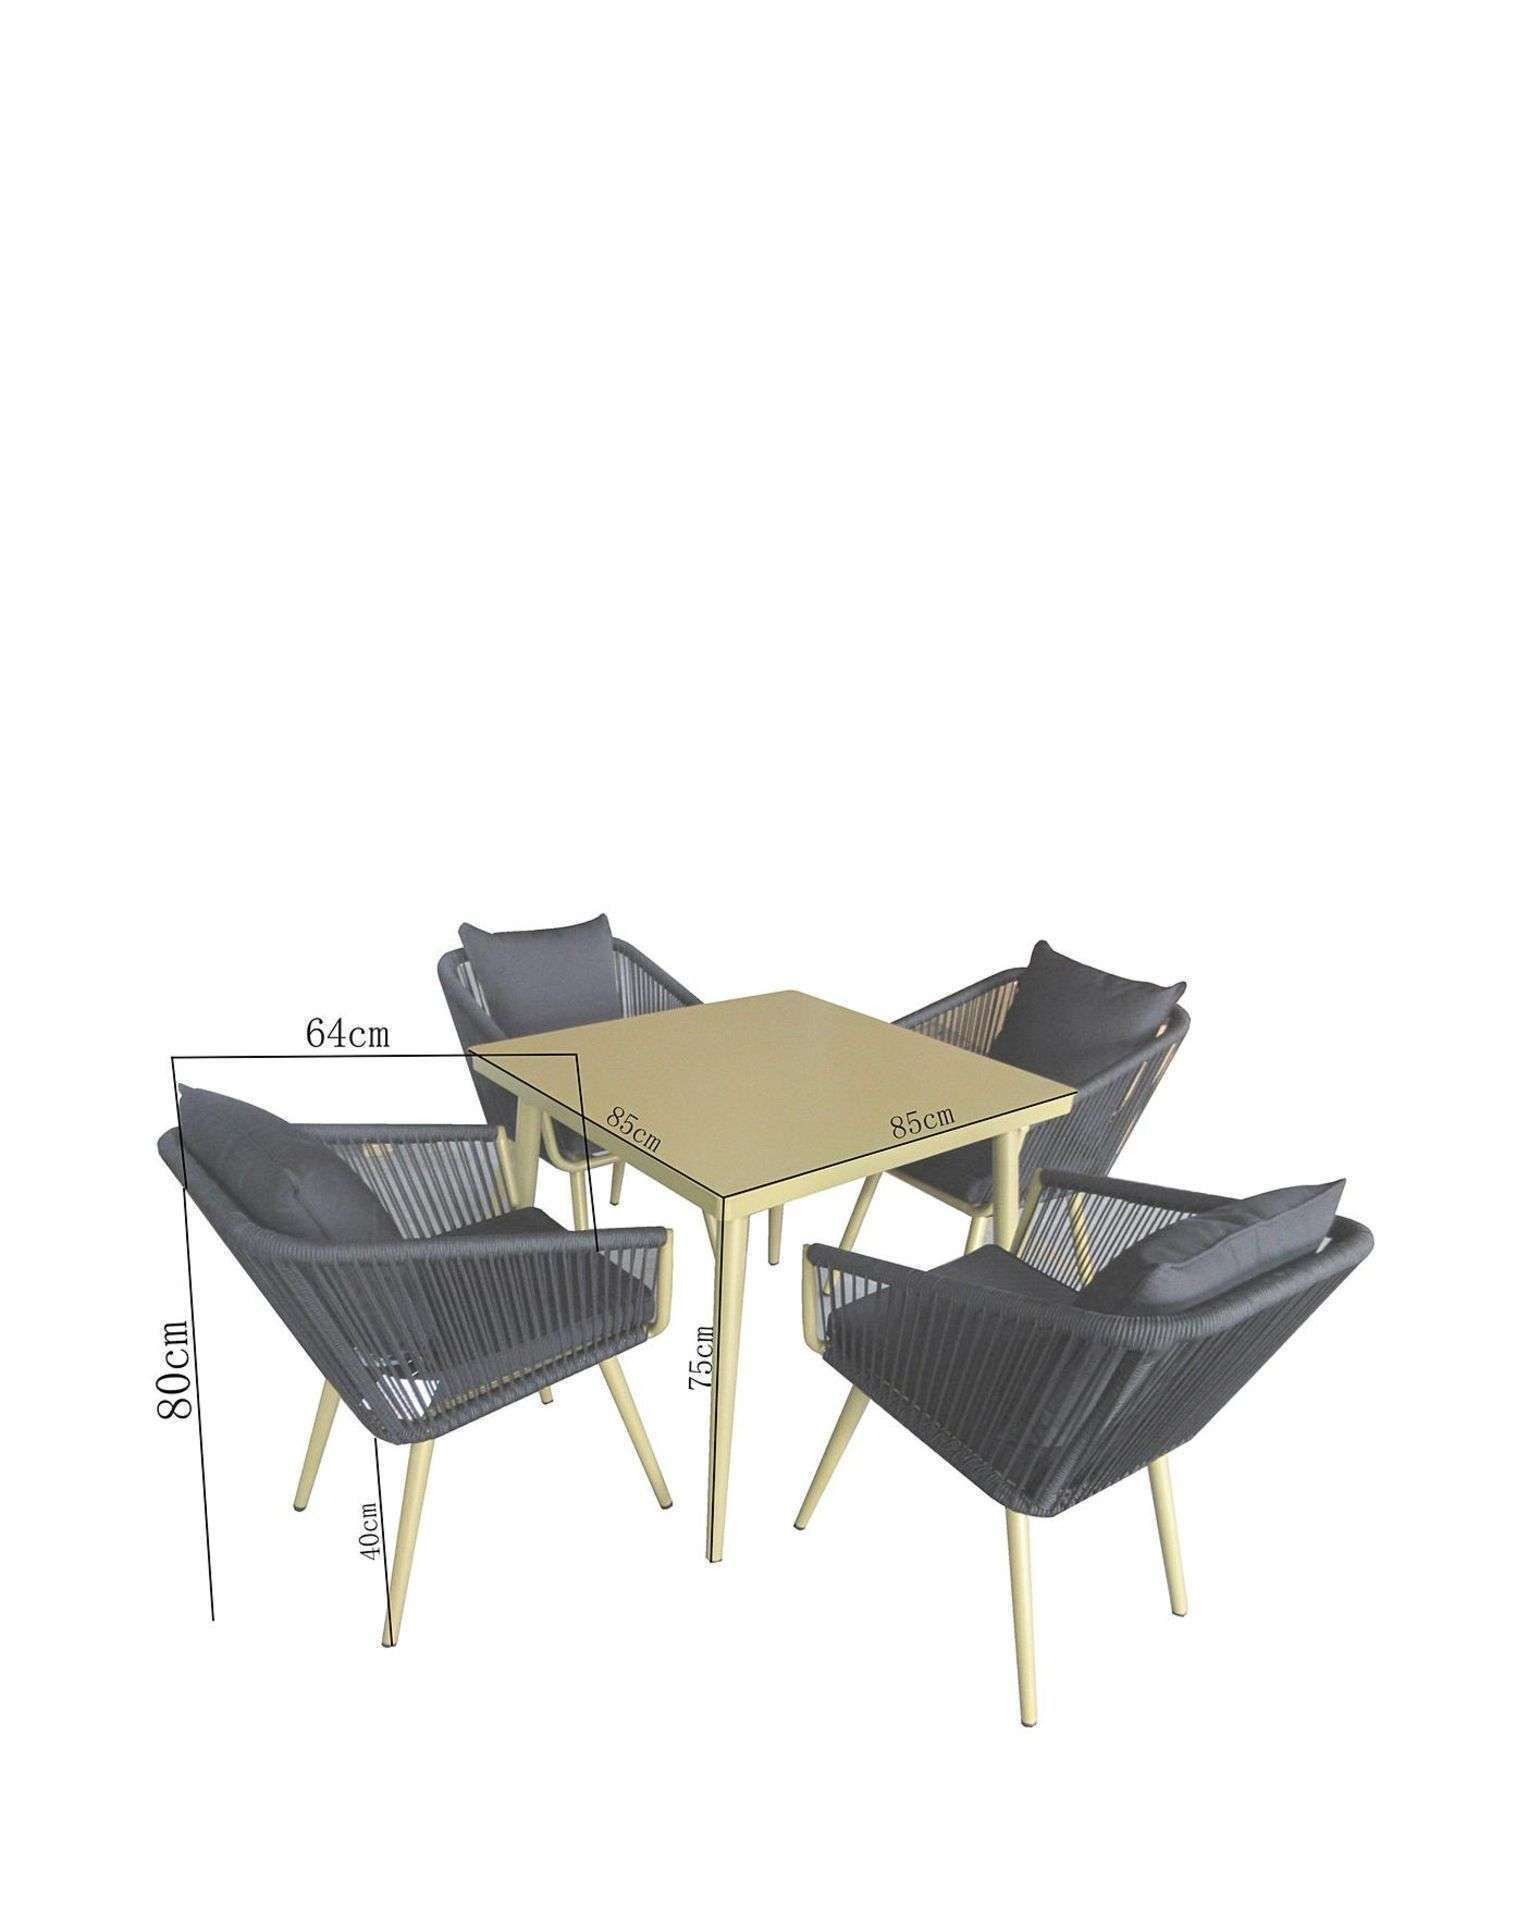 New & Packaged Joanna Hope Naya 4 Seater Dining Set. RRP £719. (P/W)This Exclusive Joanna Hope - Image 5 of 5